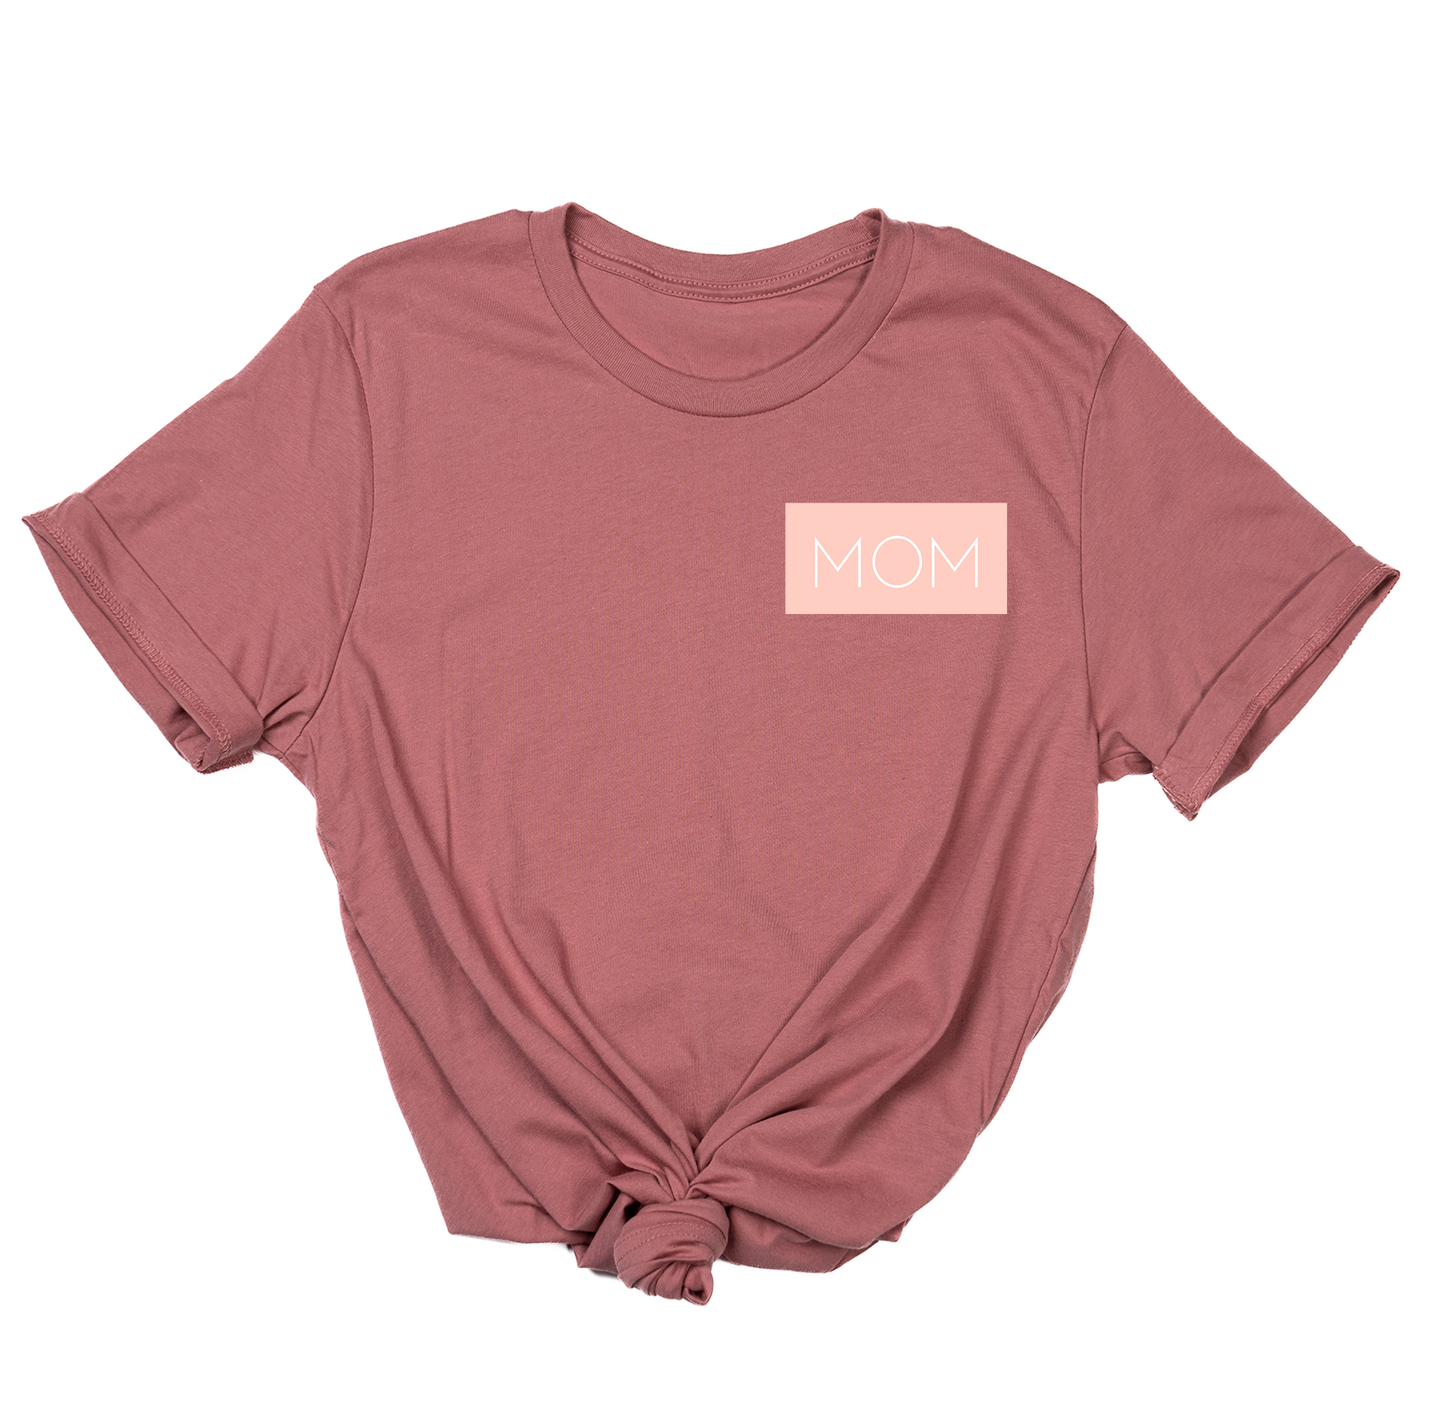 Mom (Boxed Collection, Pocket, Ballerina Pink Box/White Text) - Tee (Mauve)